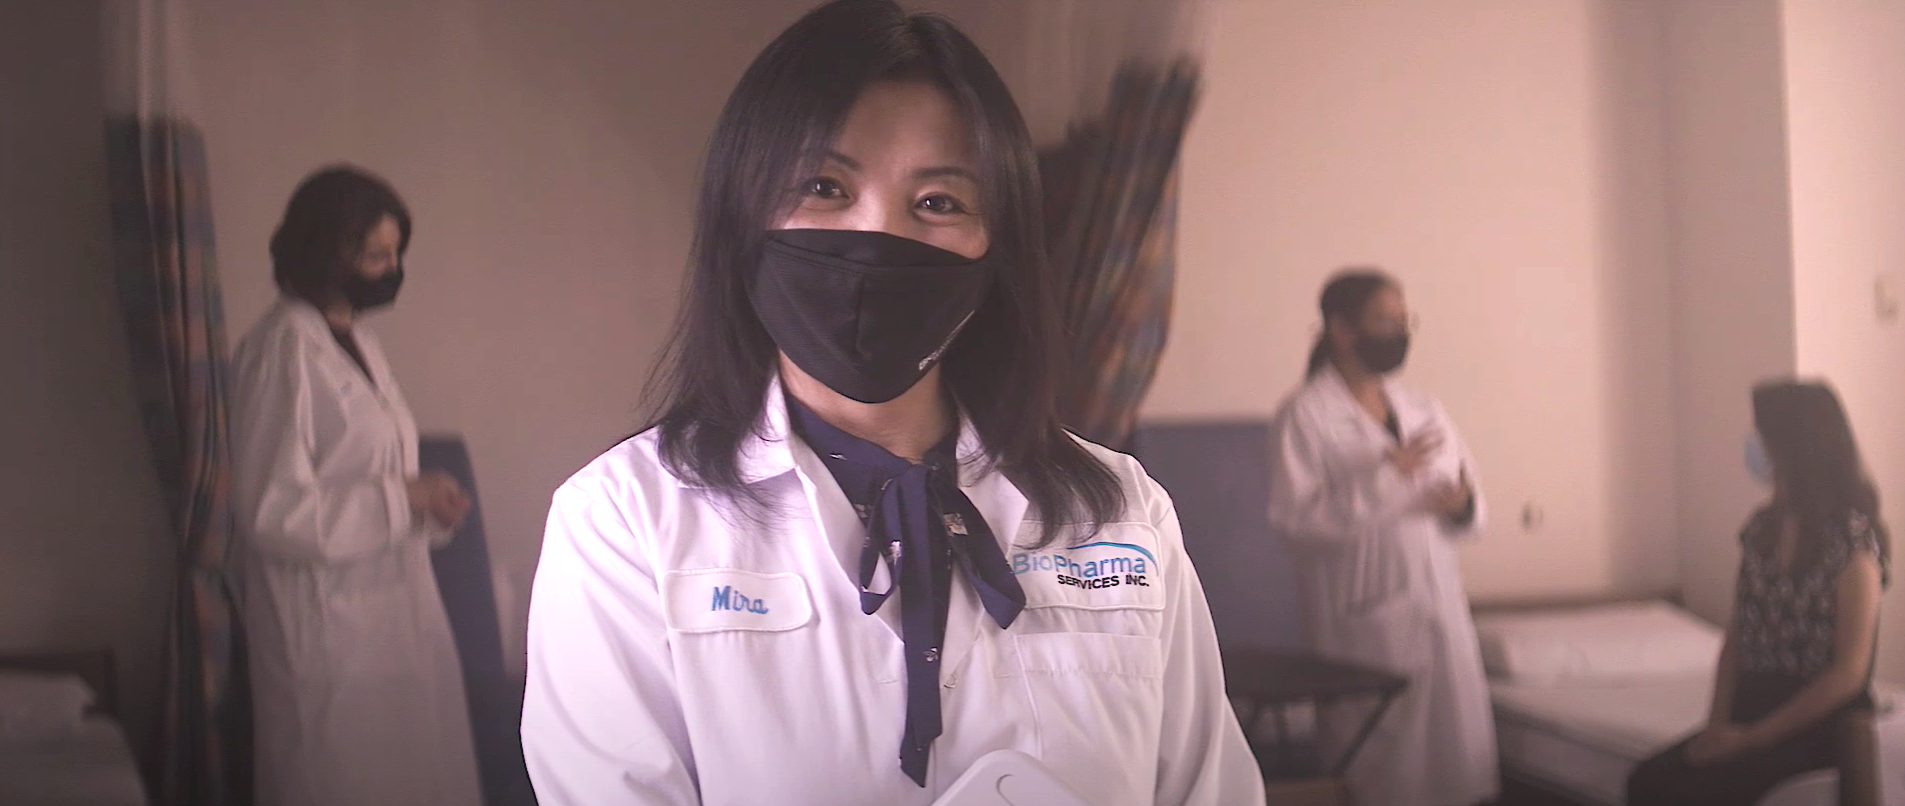 A clinical study team member looks at the camera while volunteers are being attended to in the background.